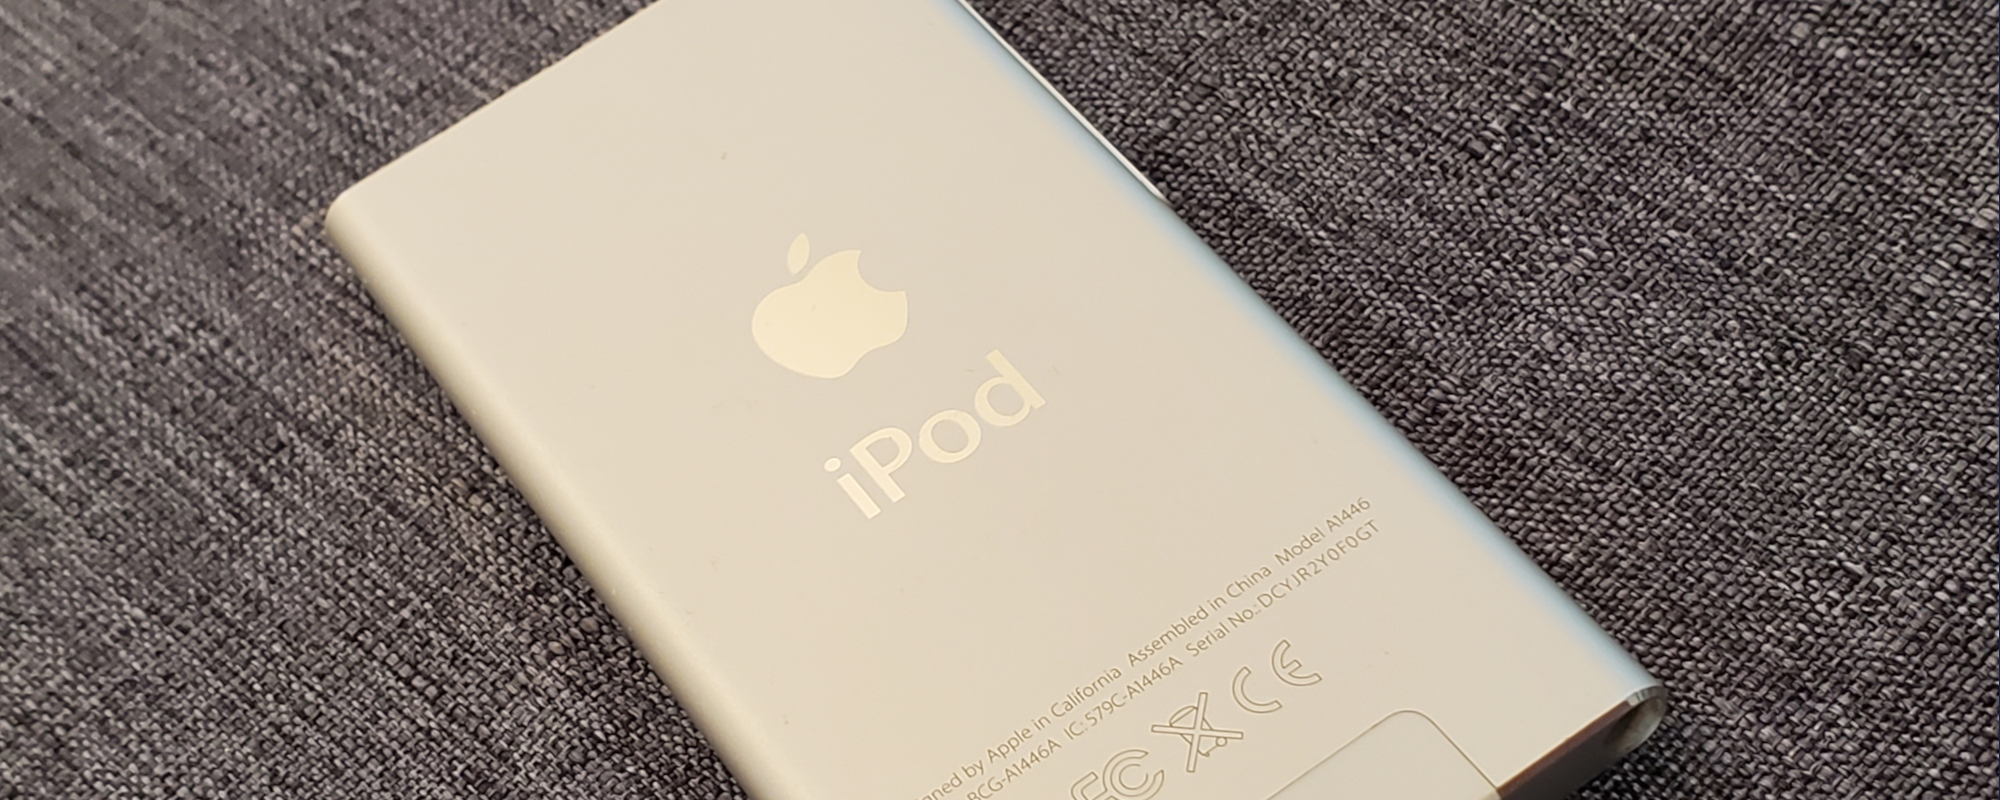 After 20 Years, Apple Discontinues iPod